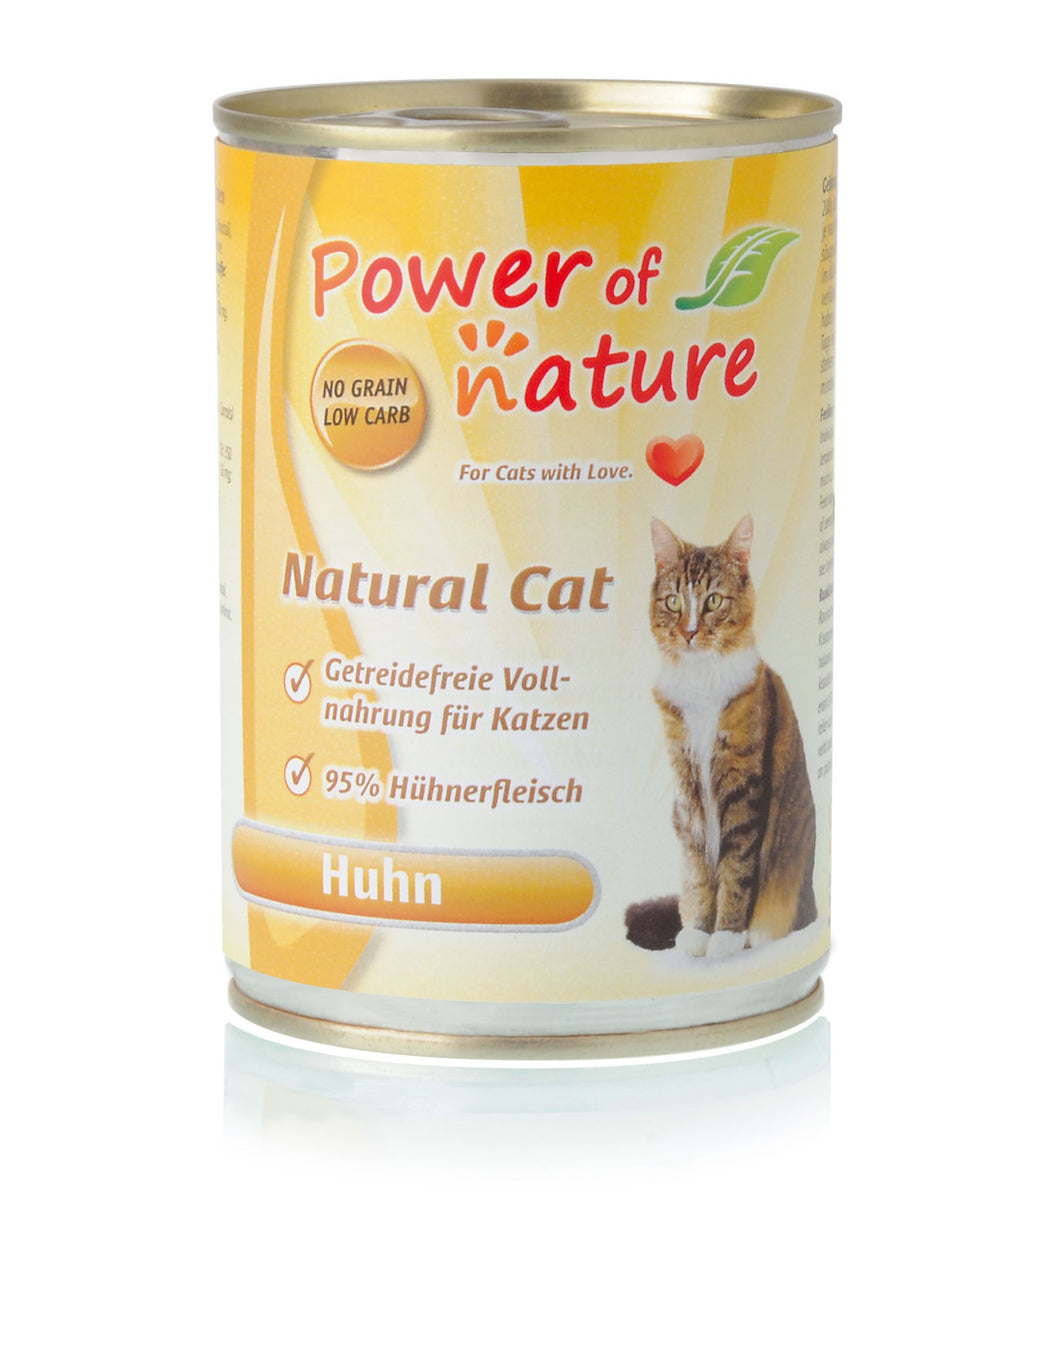 POWER OF NATURE Natural Cat Wet Food 400g - Chicken